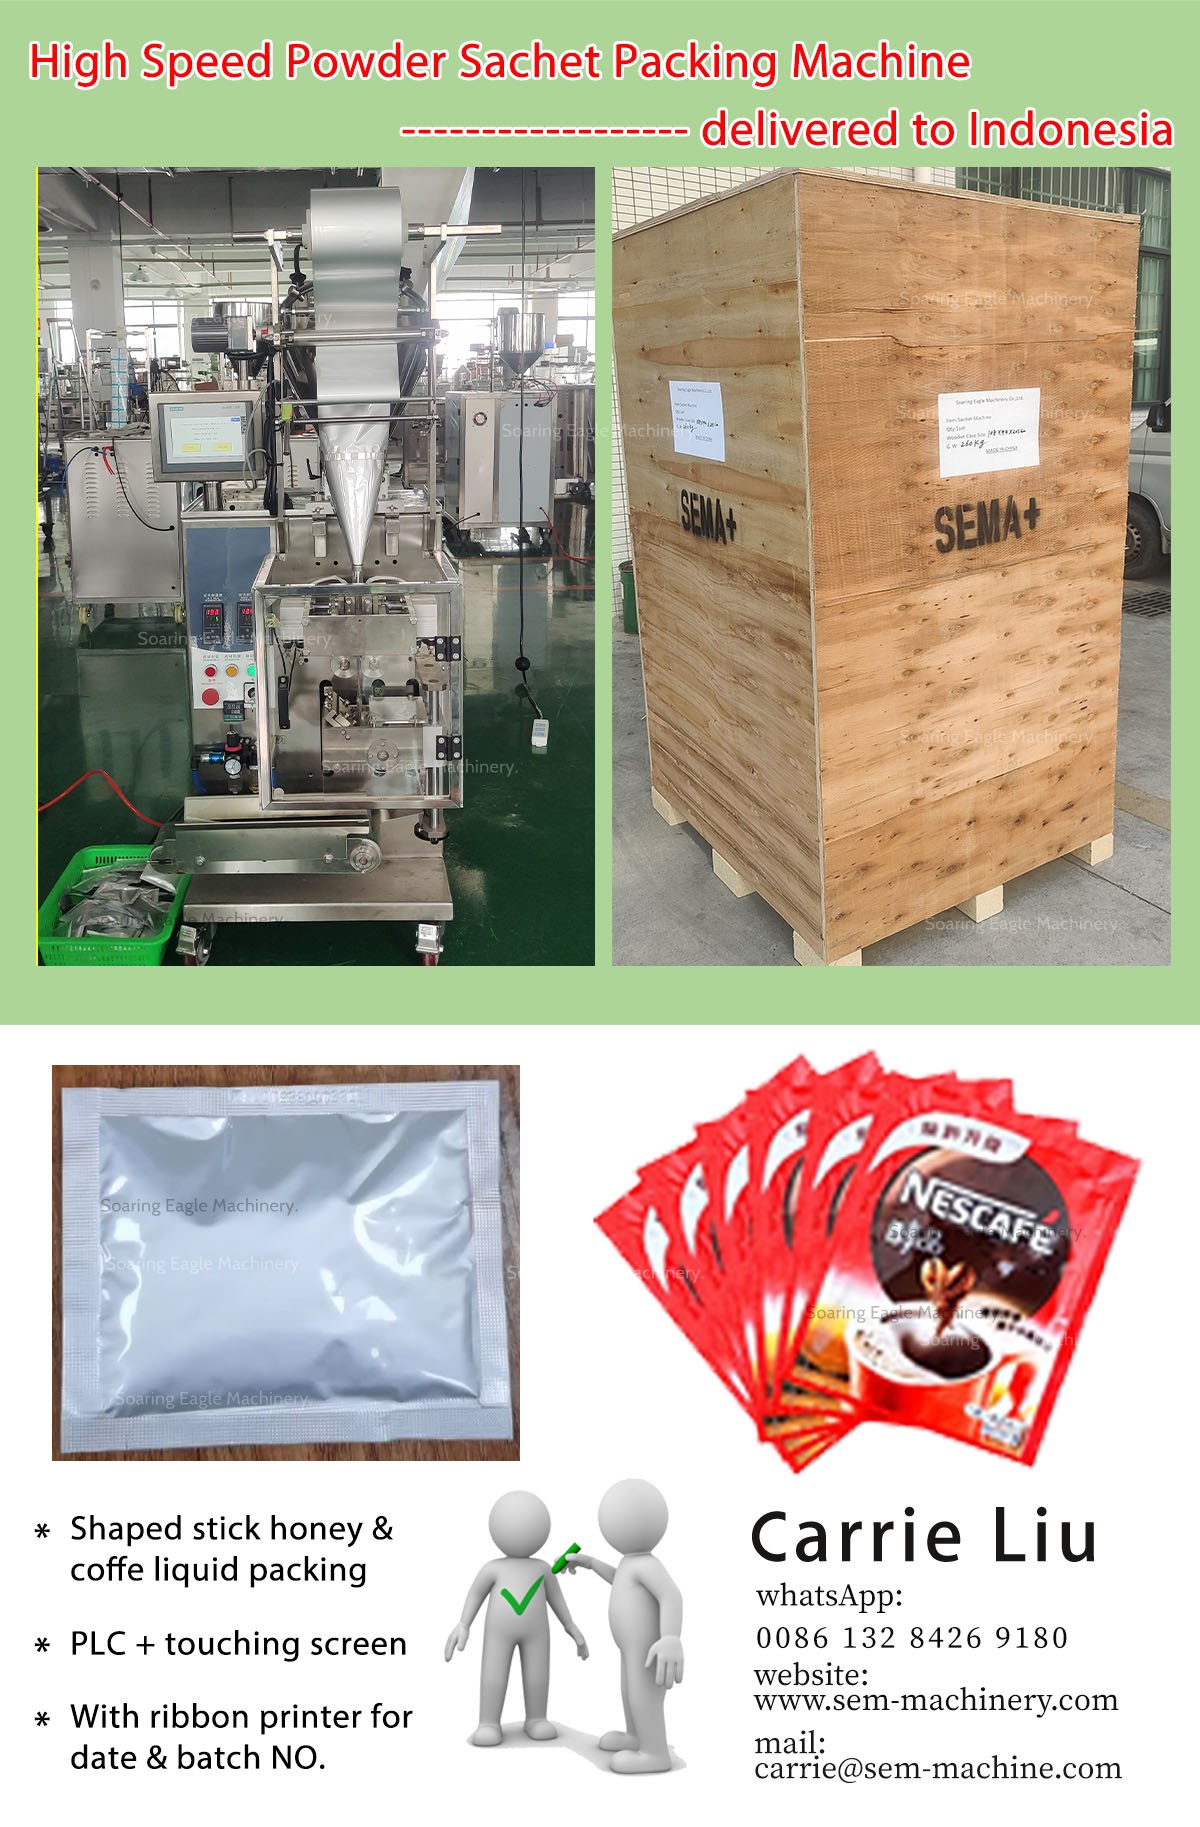 Automatic high speed powder sachet packing machine ——Delivered to Indonesia